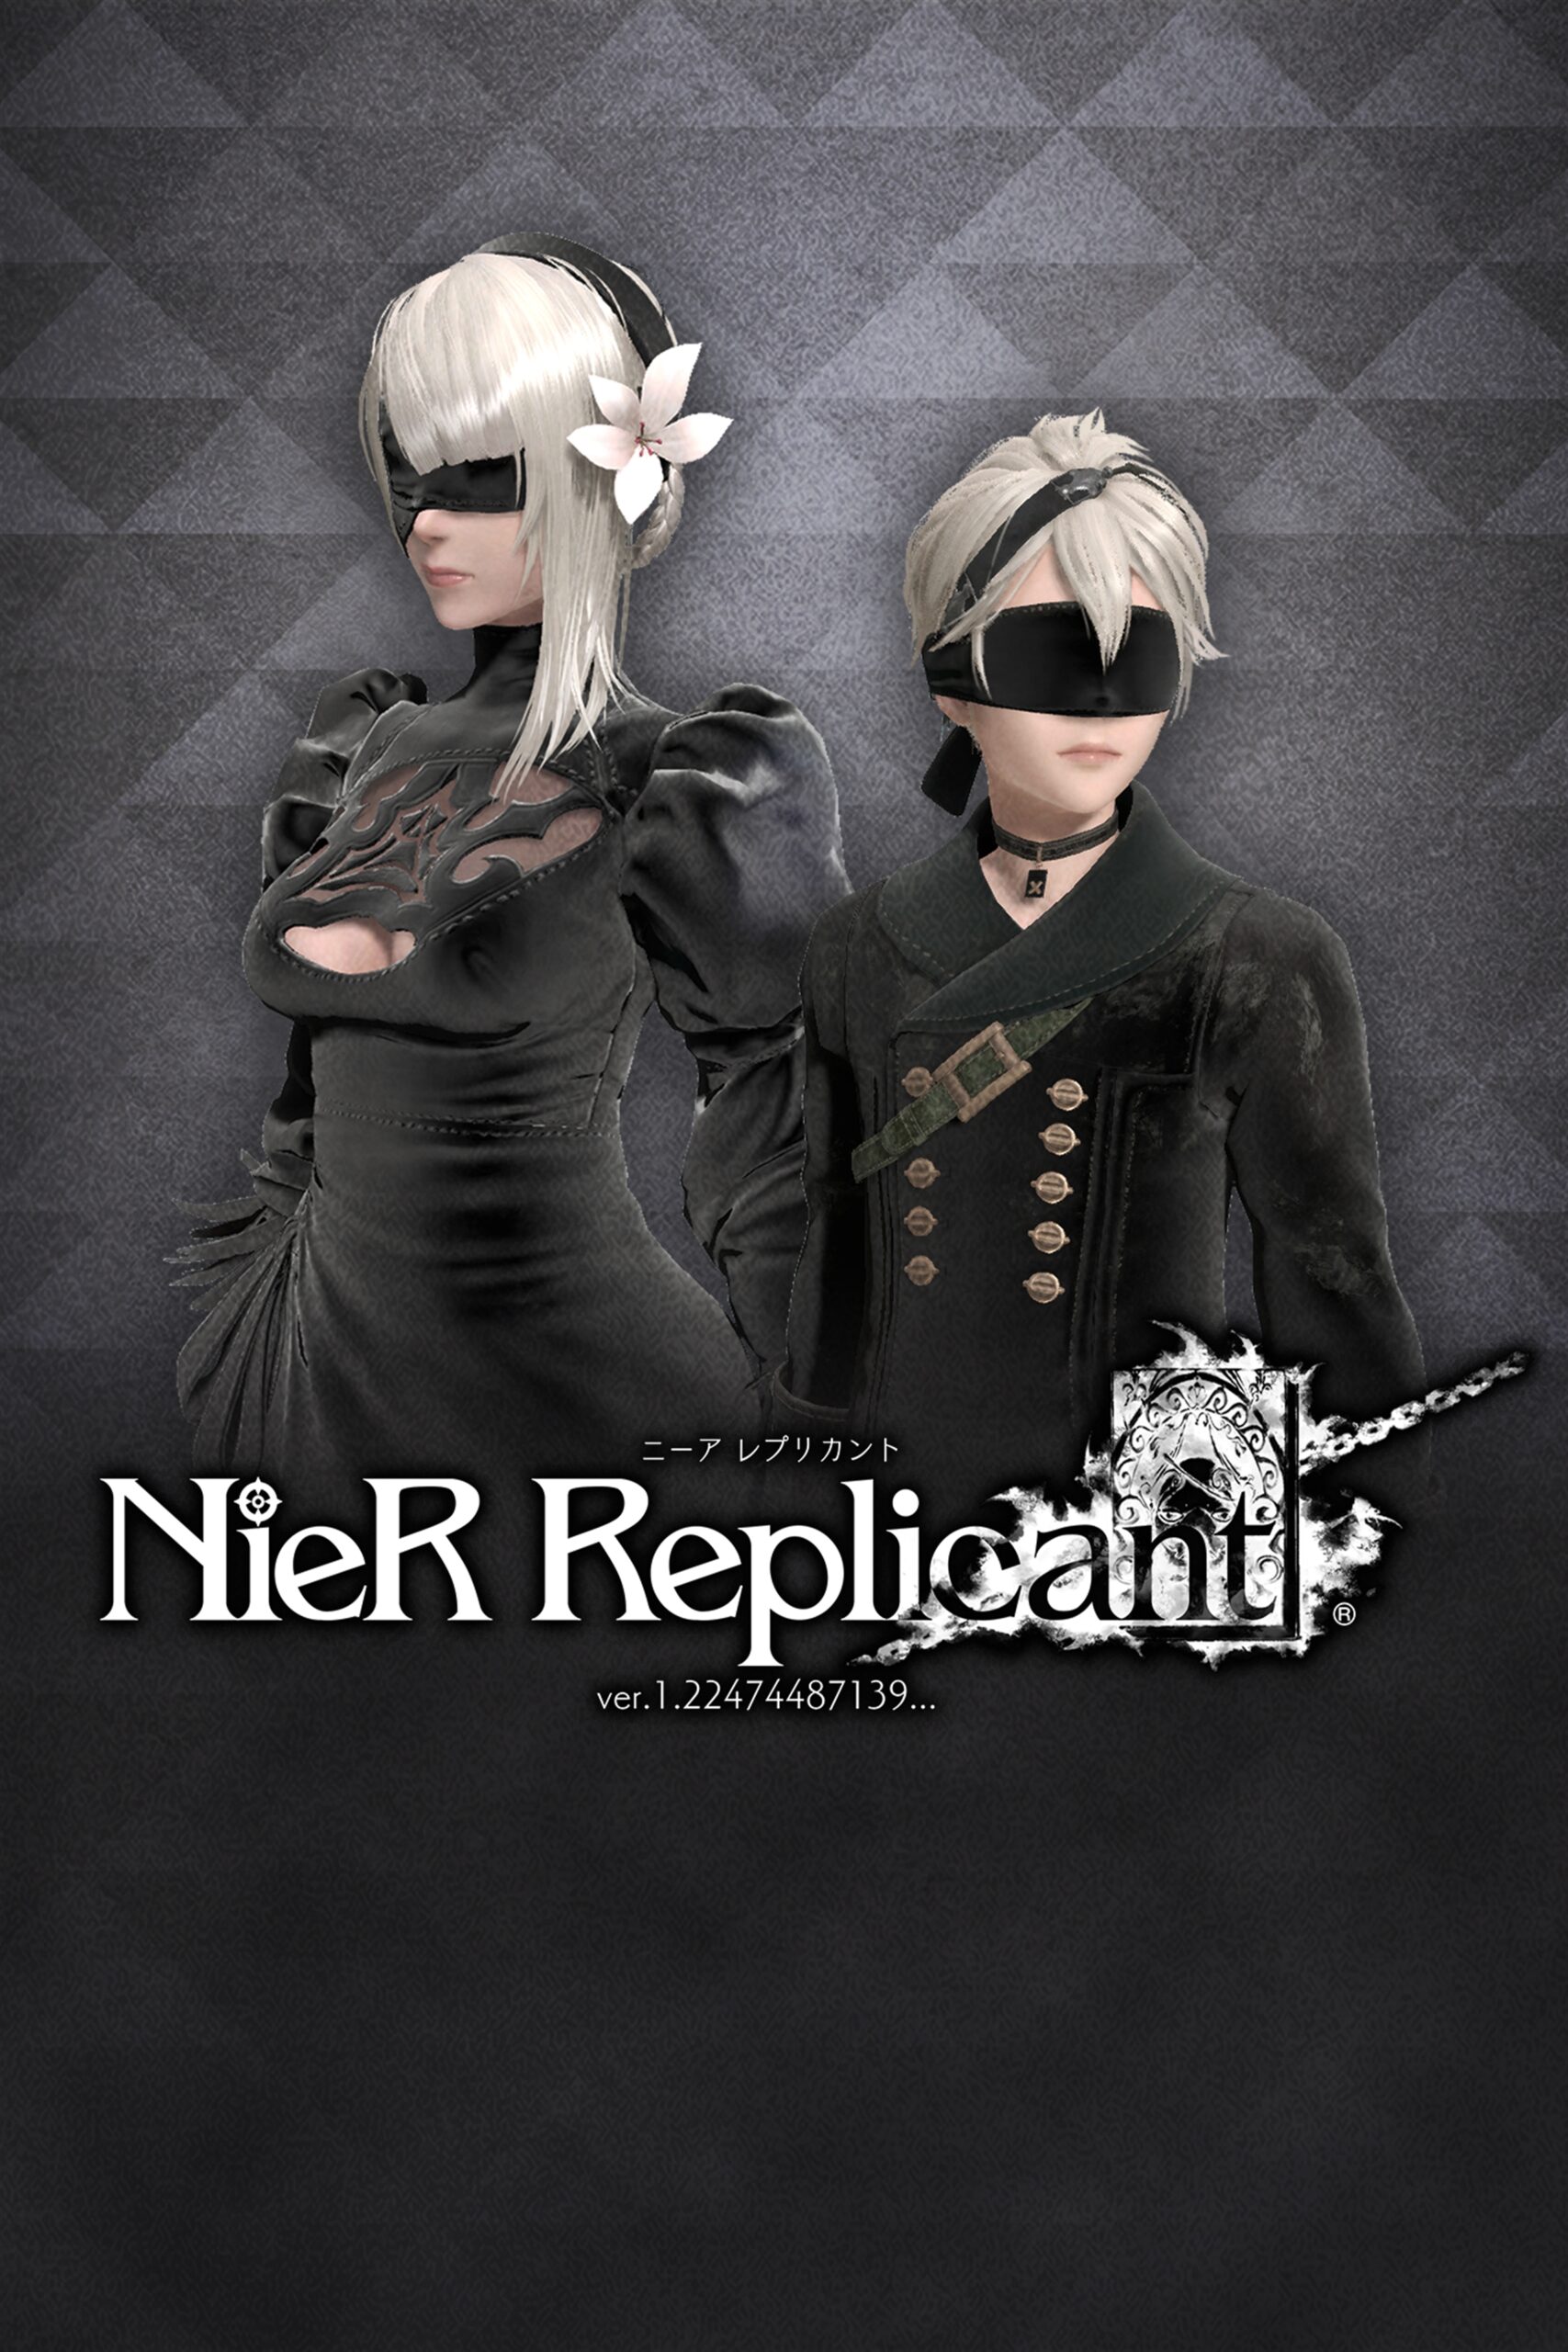 Replicant ver.1.22474487139… costumes and weapons DLC '4 YoRHa' revealed -